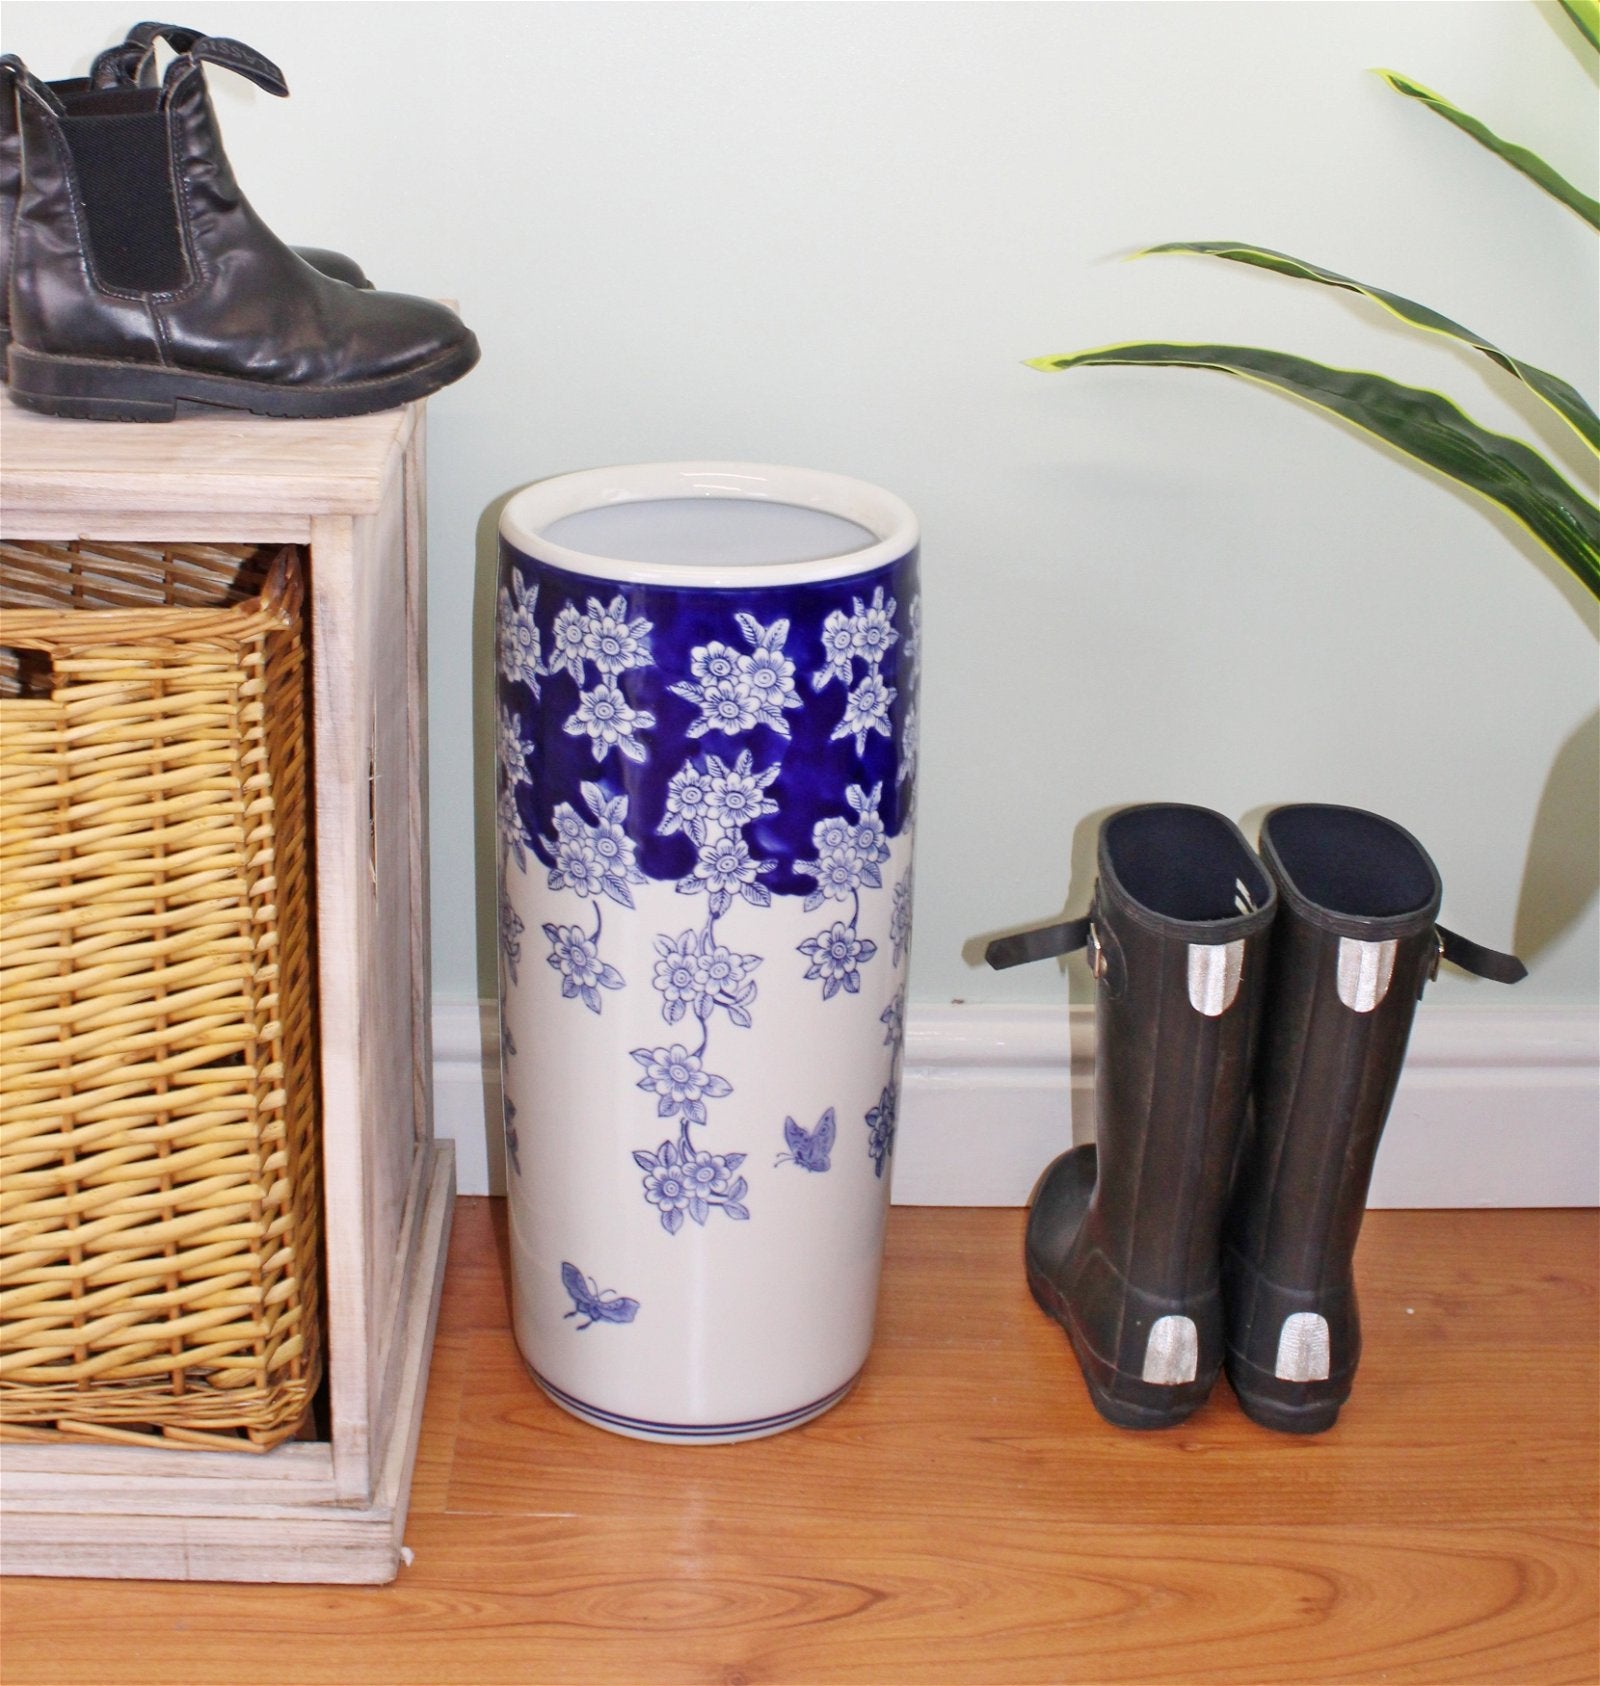 Umbrella Stand, Vintage Blue & White Flowers and Butterfly Design Willow and Wine